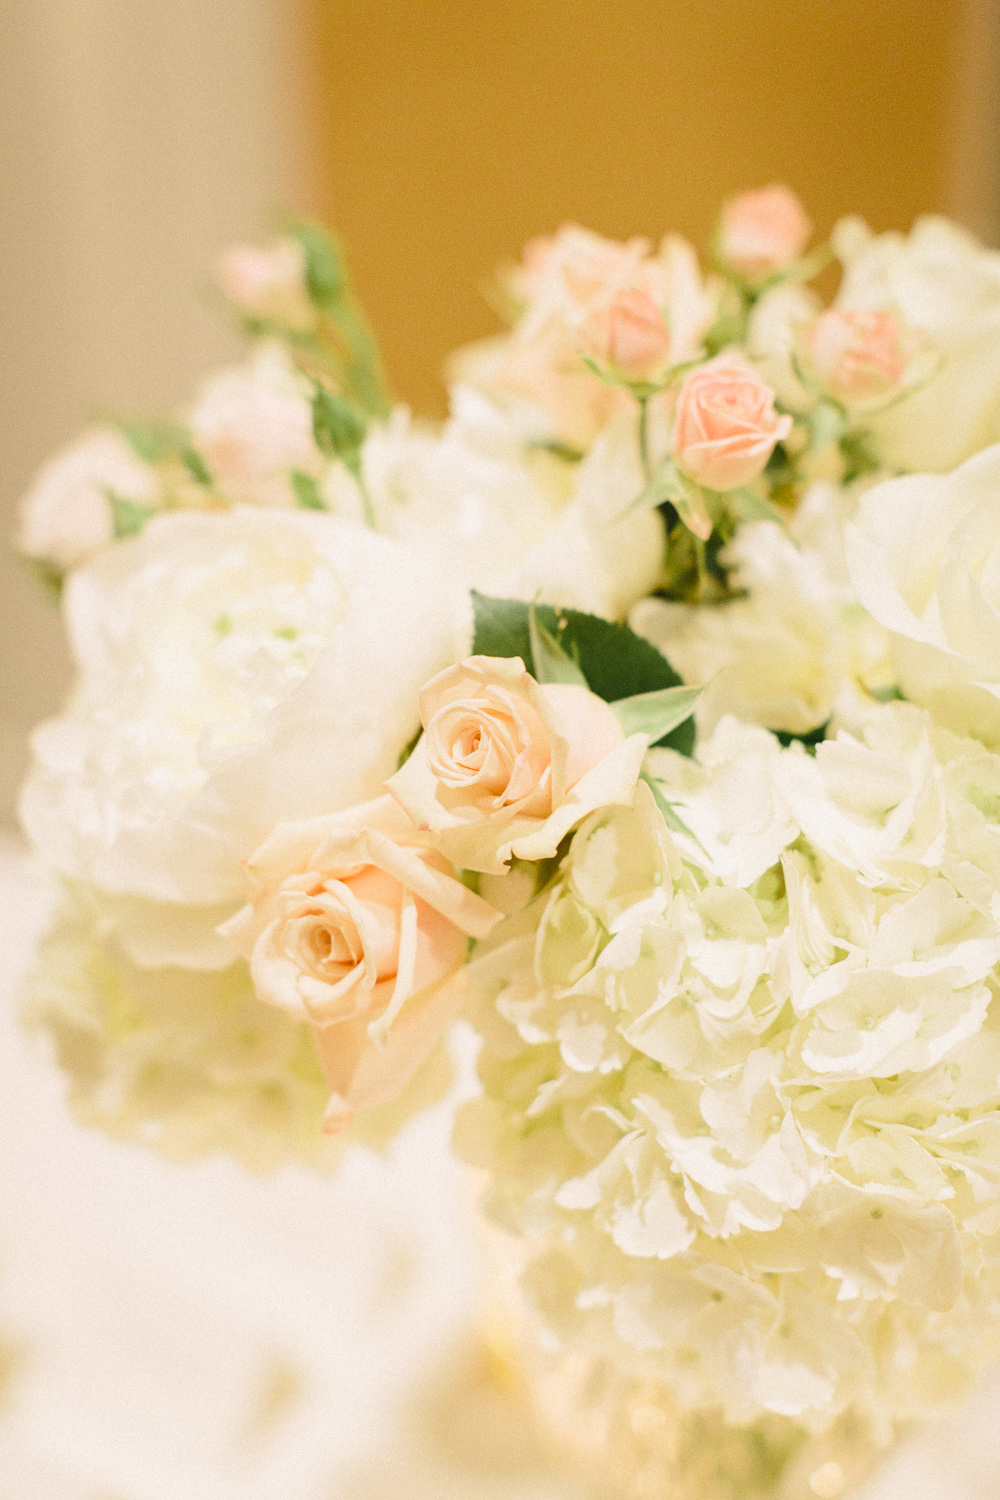 Peach and White Roses and White Hydrangea Floral Arrangement